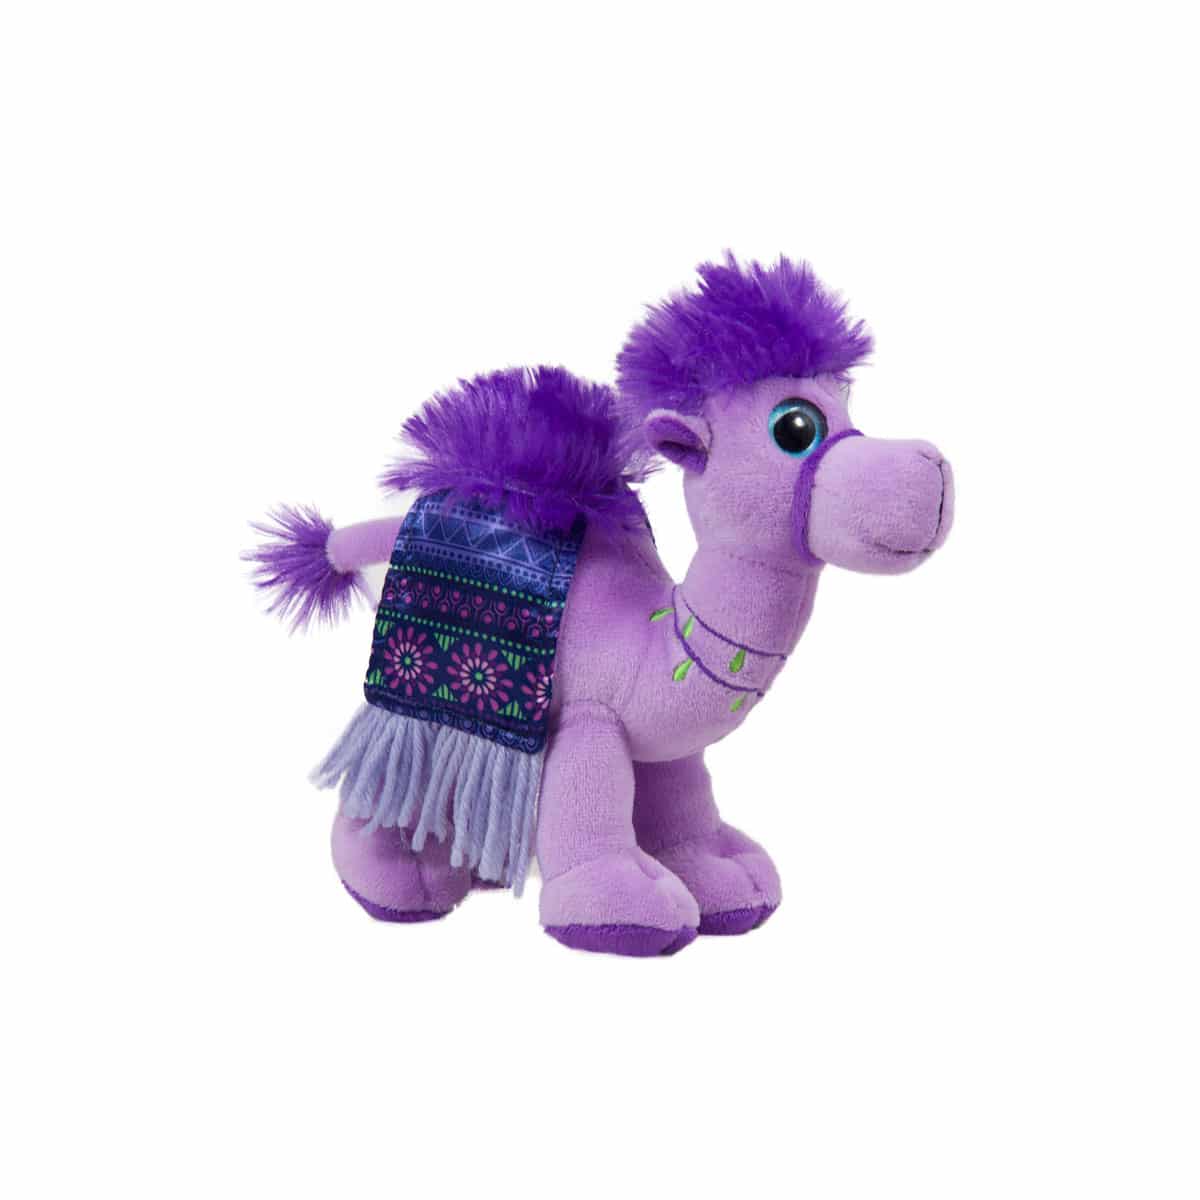 Camel with a colorful saddle - Purple